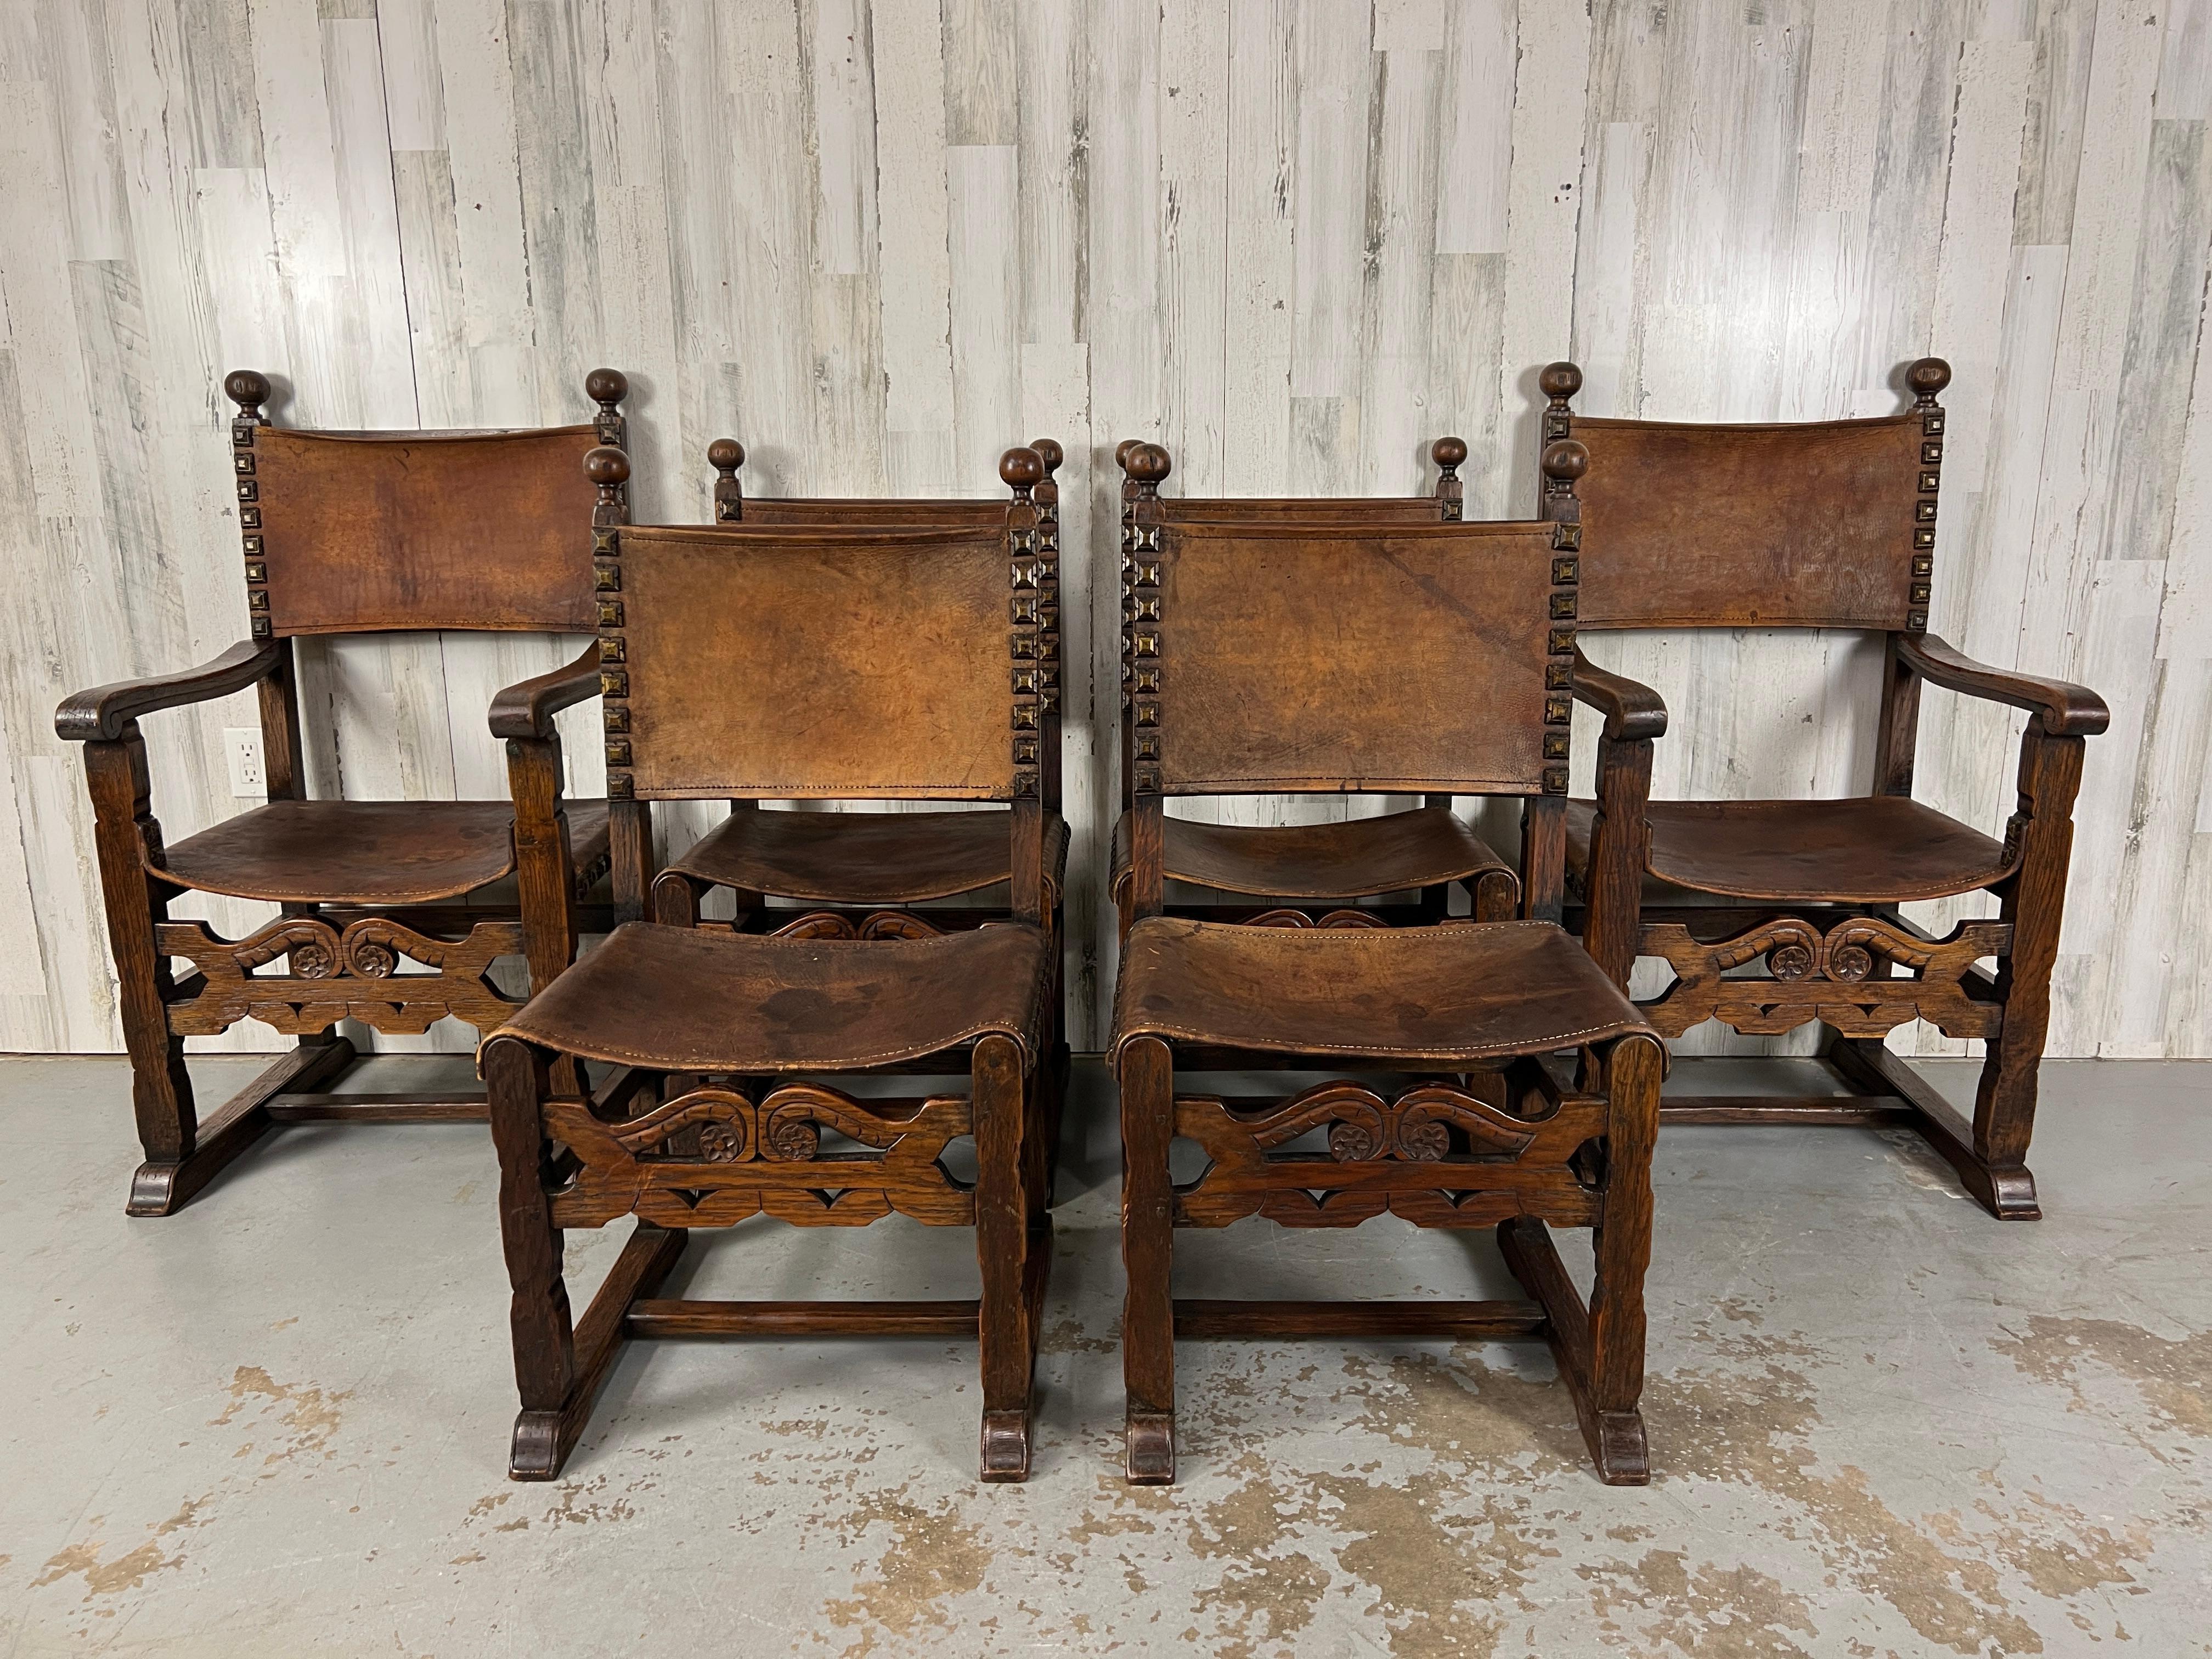 Set of six antique rustic Renaissance style solid oak hand carved dining chairs with thick saddle leather and large brass decorative studs. Nice patina on the leather and wood.
 Arm chairs measure 22,5 deep by  23.3/8